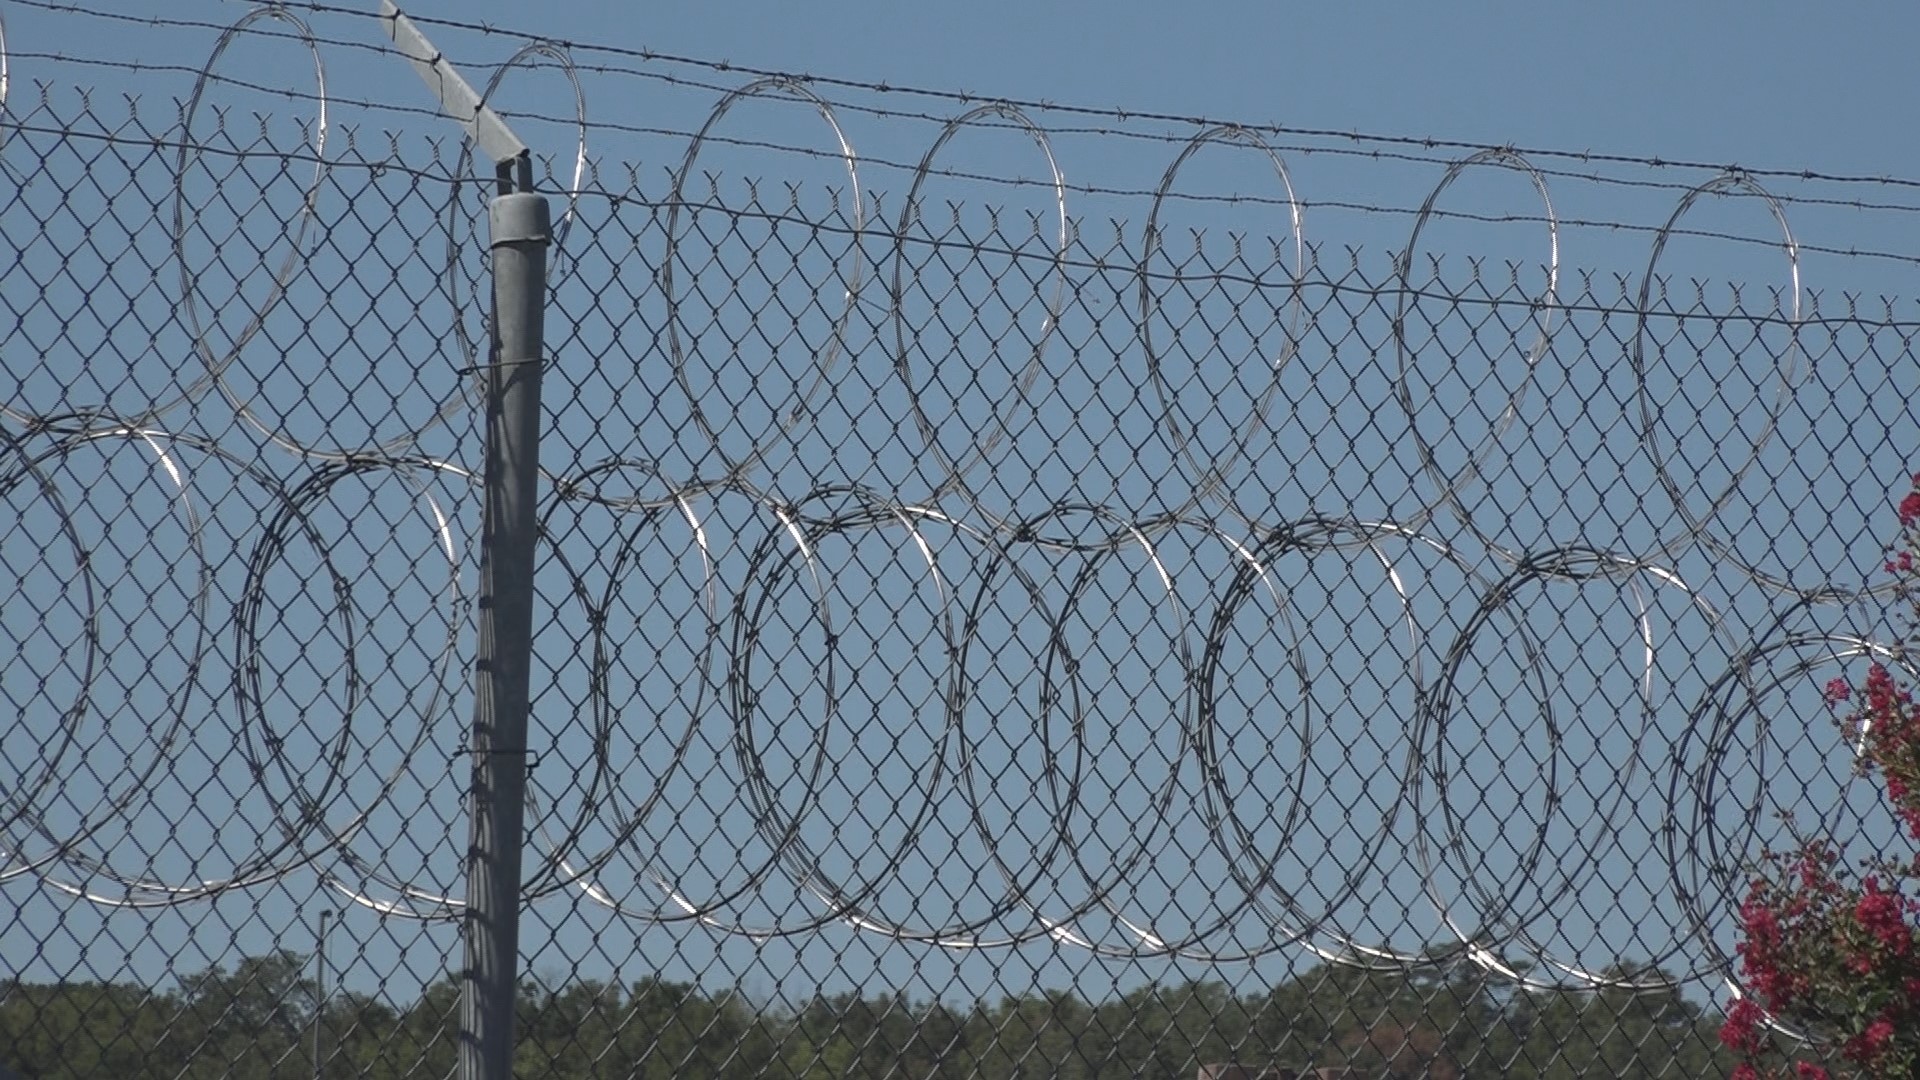 Almost 400 potential parolees may soon be released from ADC prisons.